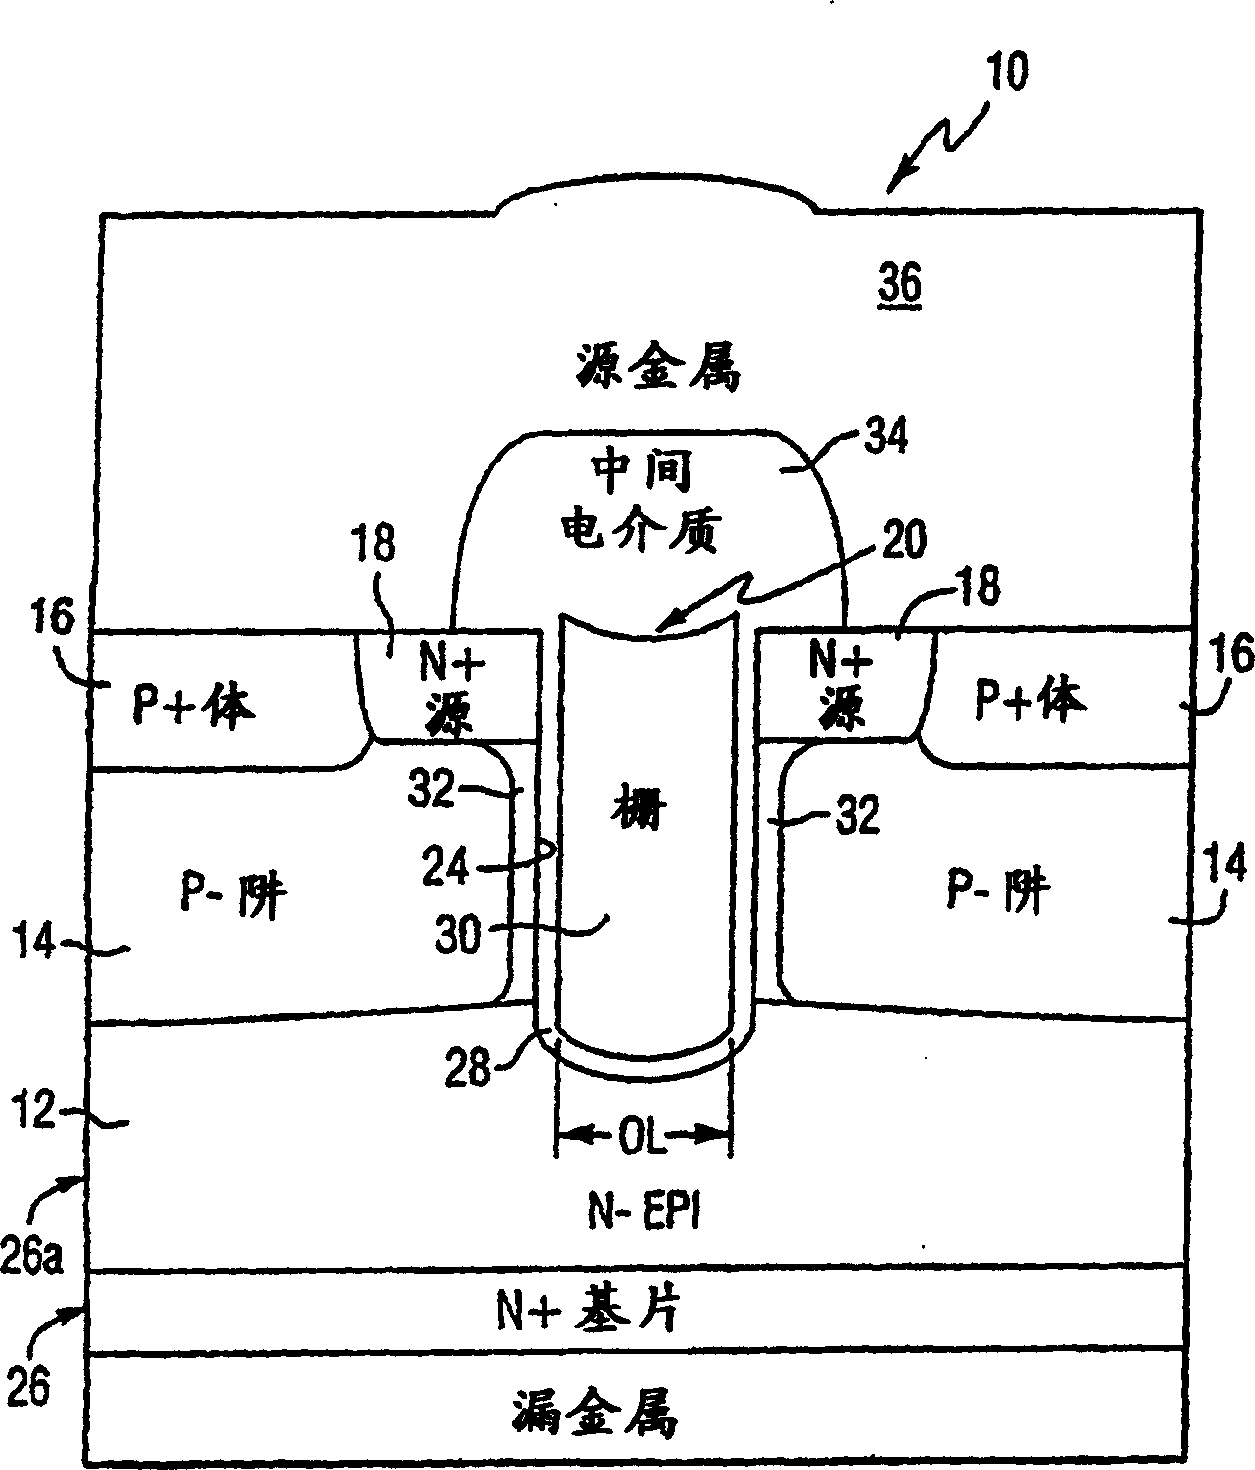 Method and apparatus for improved MOS gating to reduce miller capacitance and switching losses